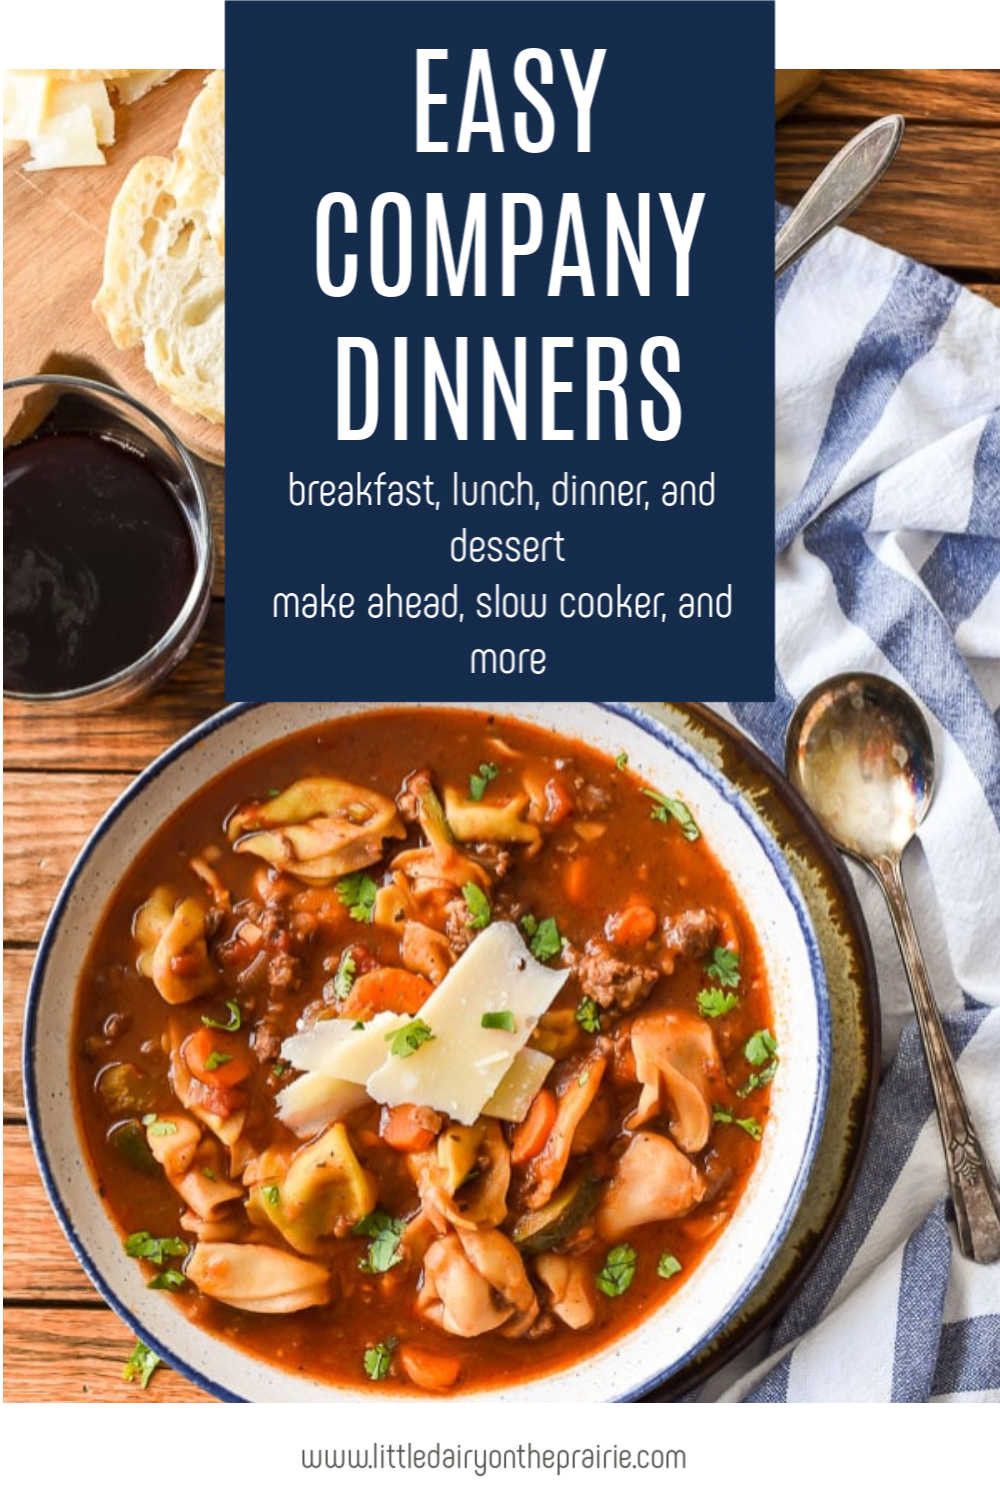 Company Dinner Ideas
 Easy pany Dinners is a has over 20 recipes for